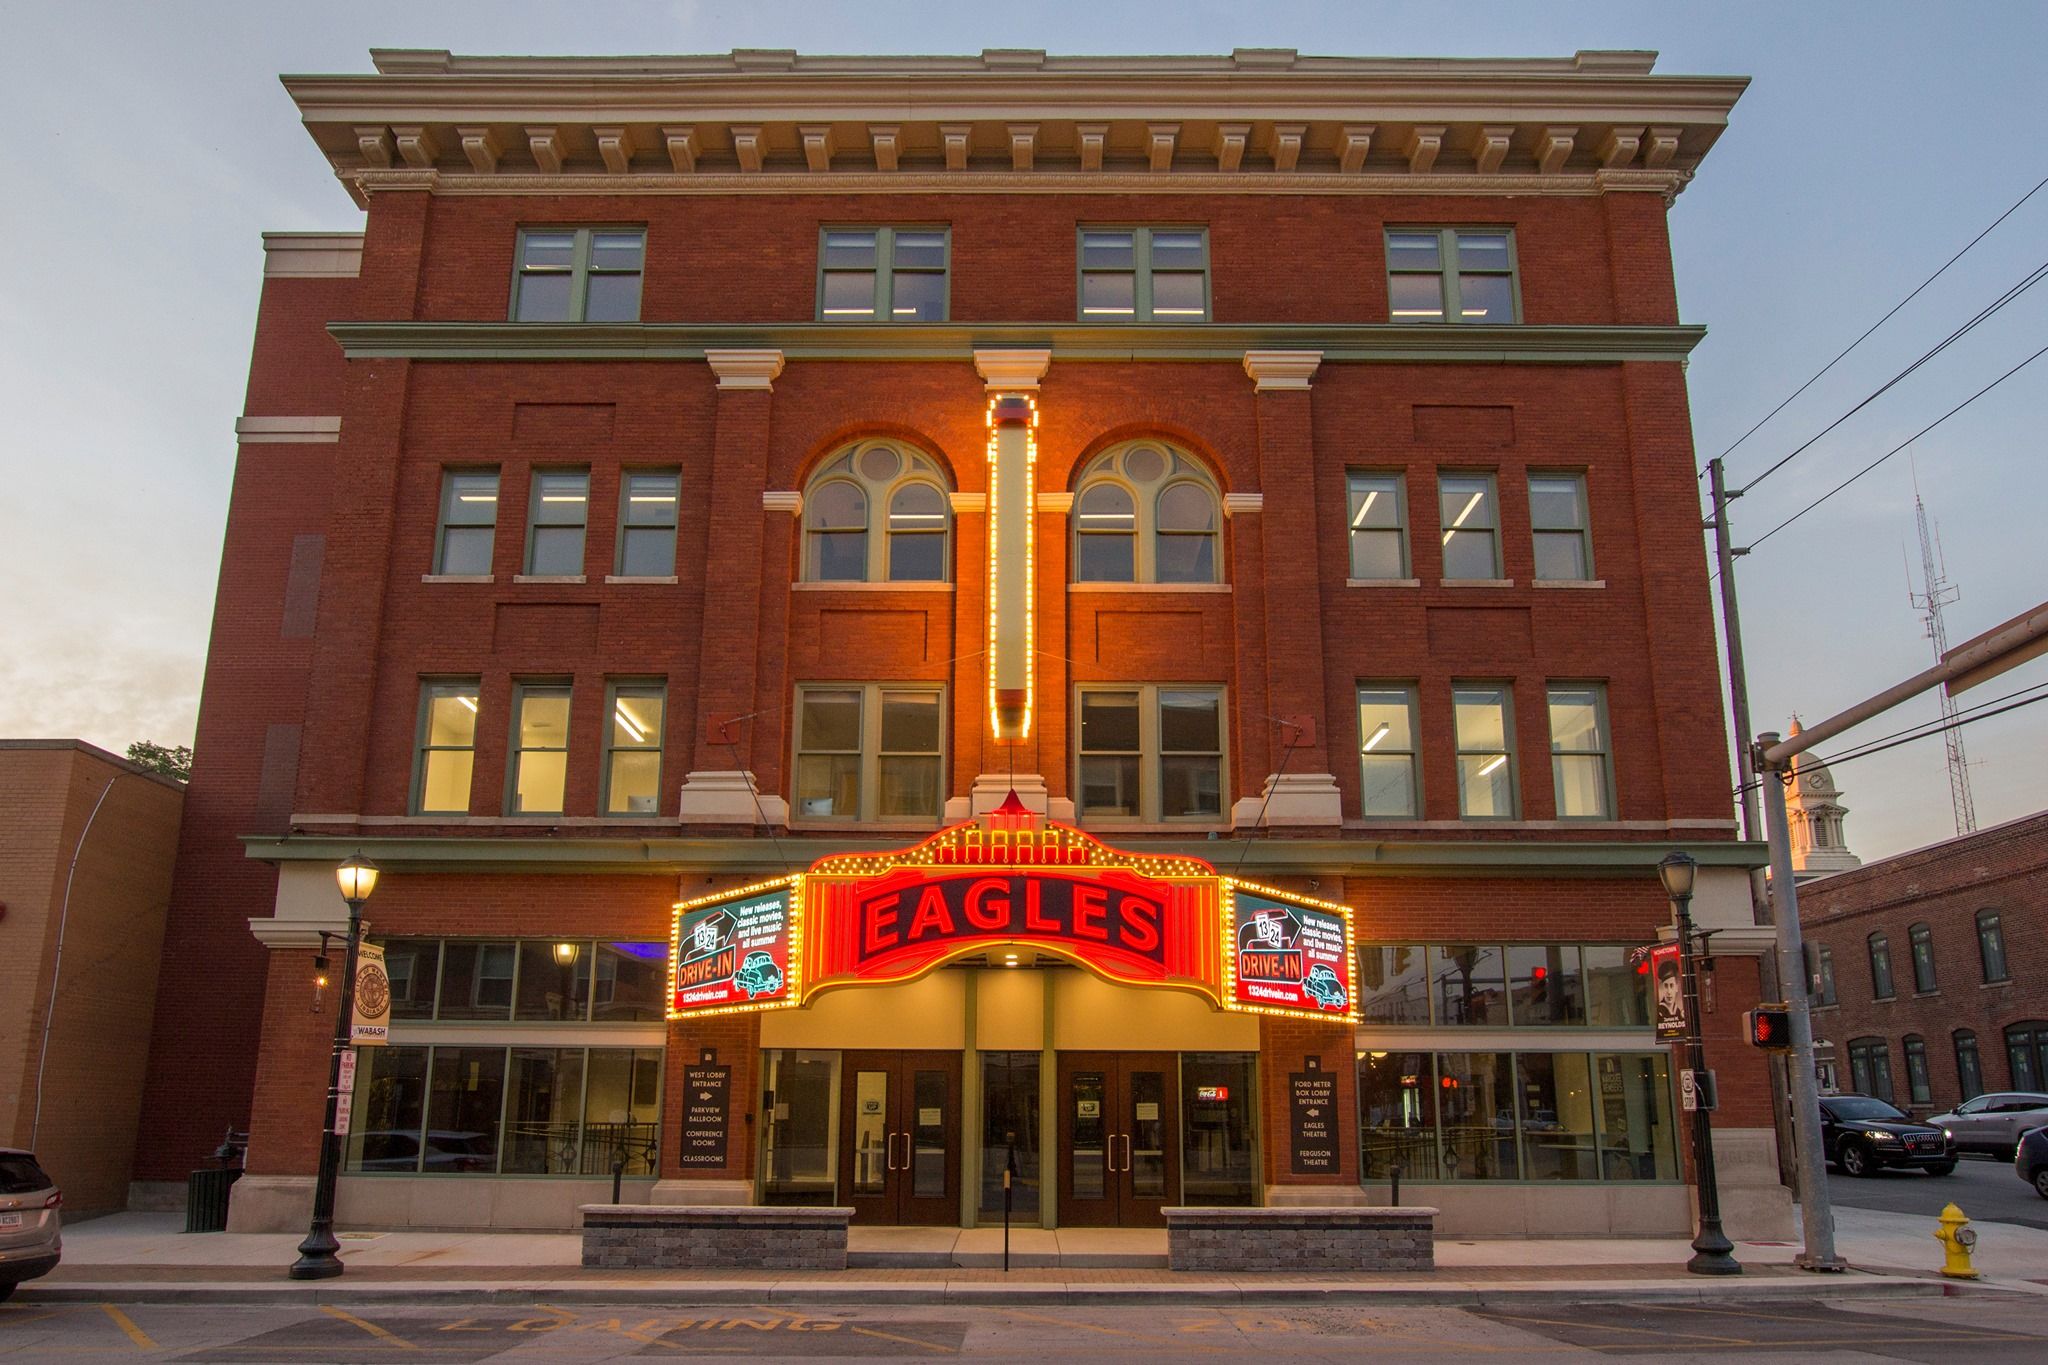 Eagles Theatre in Wabash, Indiana